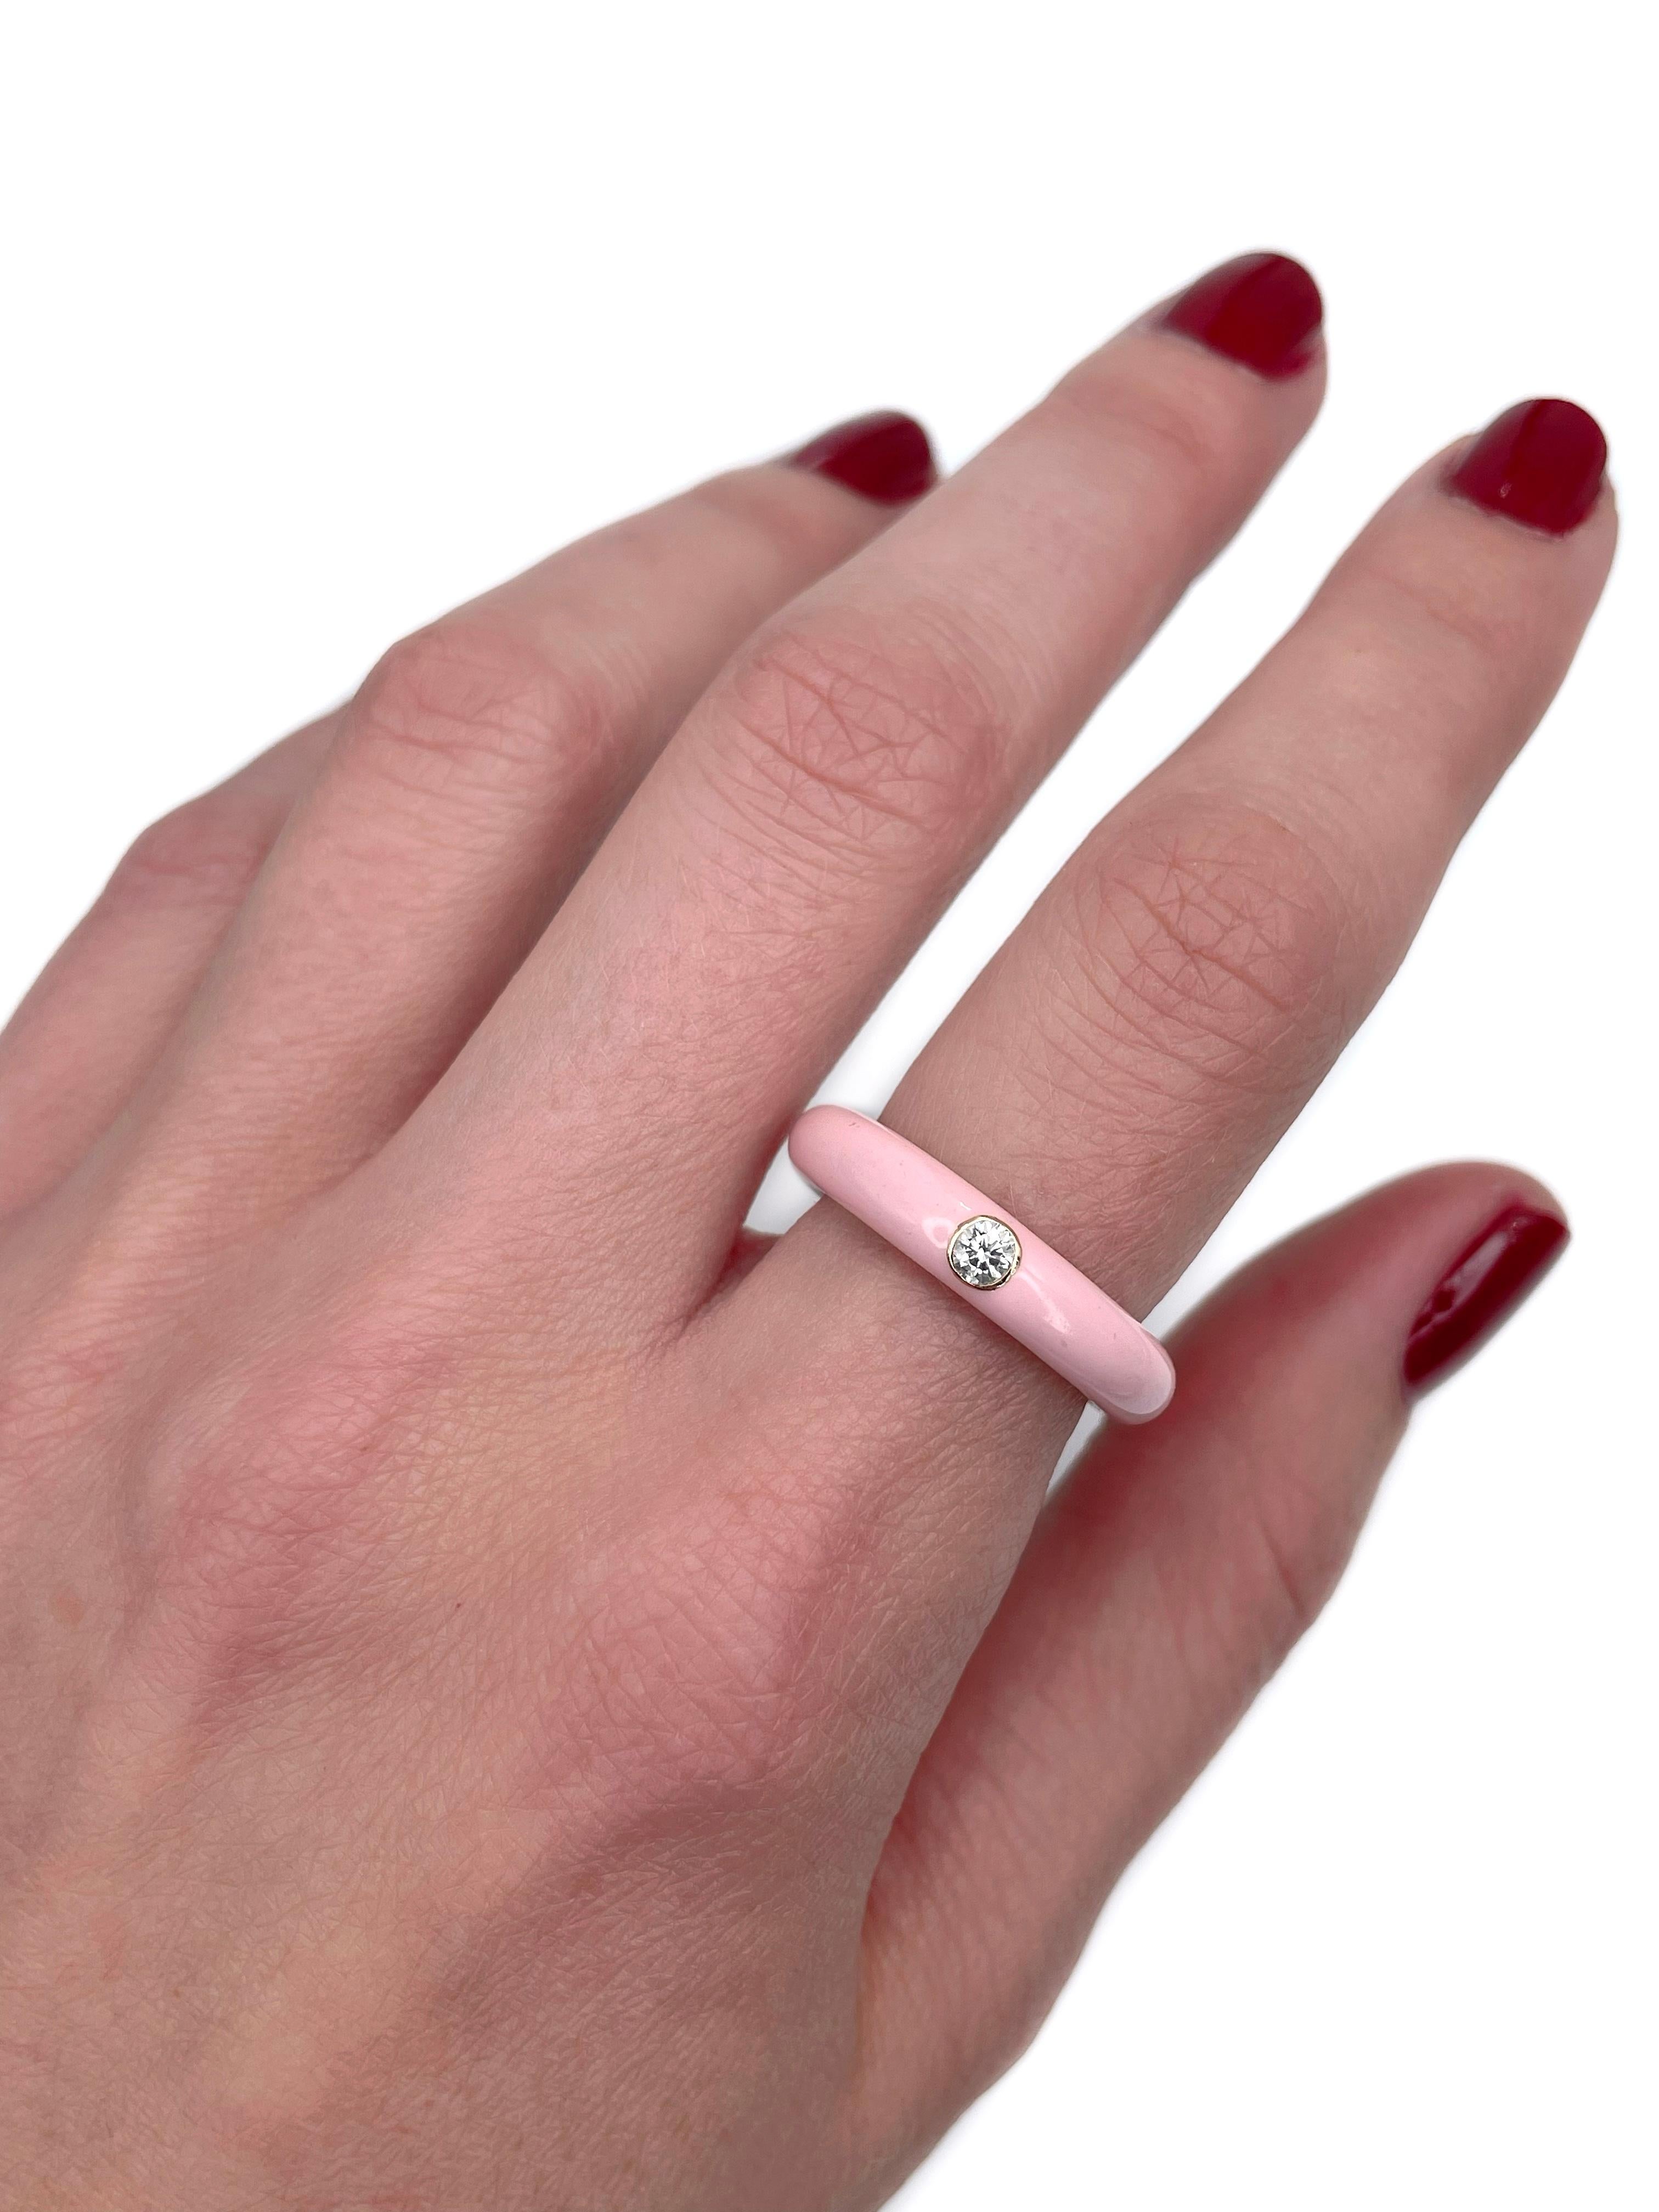 This is a modern band ring designed by the Italian jewellery company “Adolfo Courrier”. 

The piece is crafted in 18K rose gold and light pink enamel. It features ~0.10ct brilliant cut diamond.

Signed: Adolfo Courrier. Handmade in Italy.